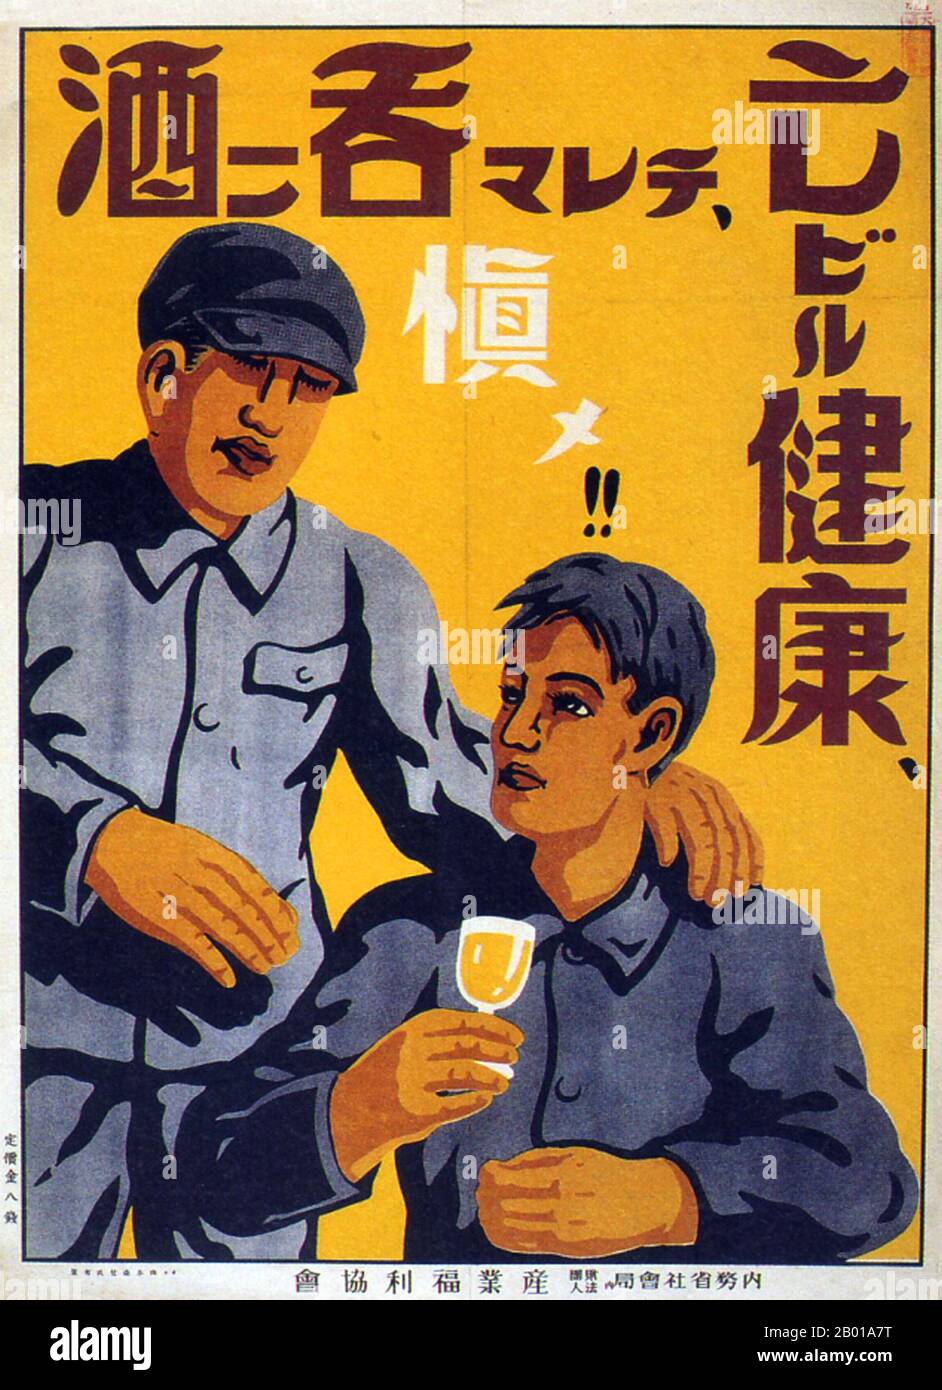 Japan: 'Indulging in Alcohol Ruins Your Health', Labour Welfare Association, 1932.  During late 1920s and 1930s Japan, a new poster style developed that reflected the growing influence of the masses in Japanese society. These art posters were strongly influenced by the emerging political forces of Communism and Fascism in Europe and the Soviet Union, adopting a style that incorporated bold slogans with artistic themes ranging from Leftist socialist realism through Stateism and state-directed public welfare, to Militarism and Imperialist expansionism. Stock Photo